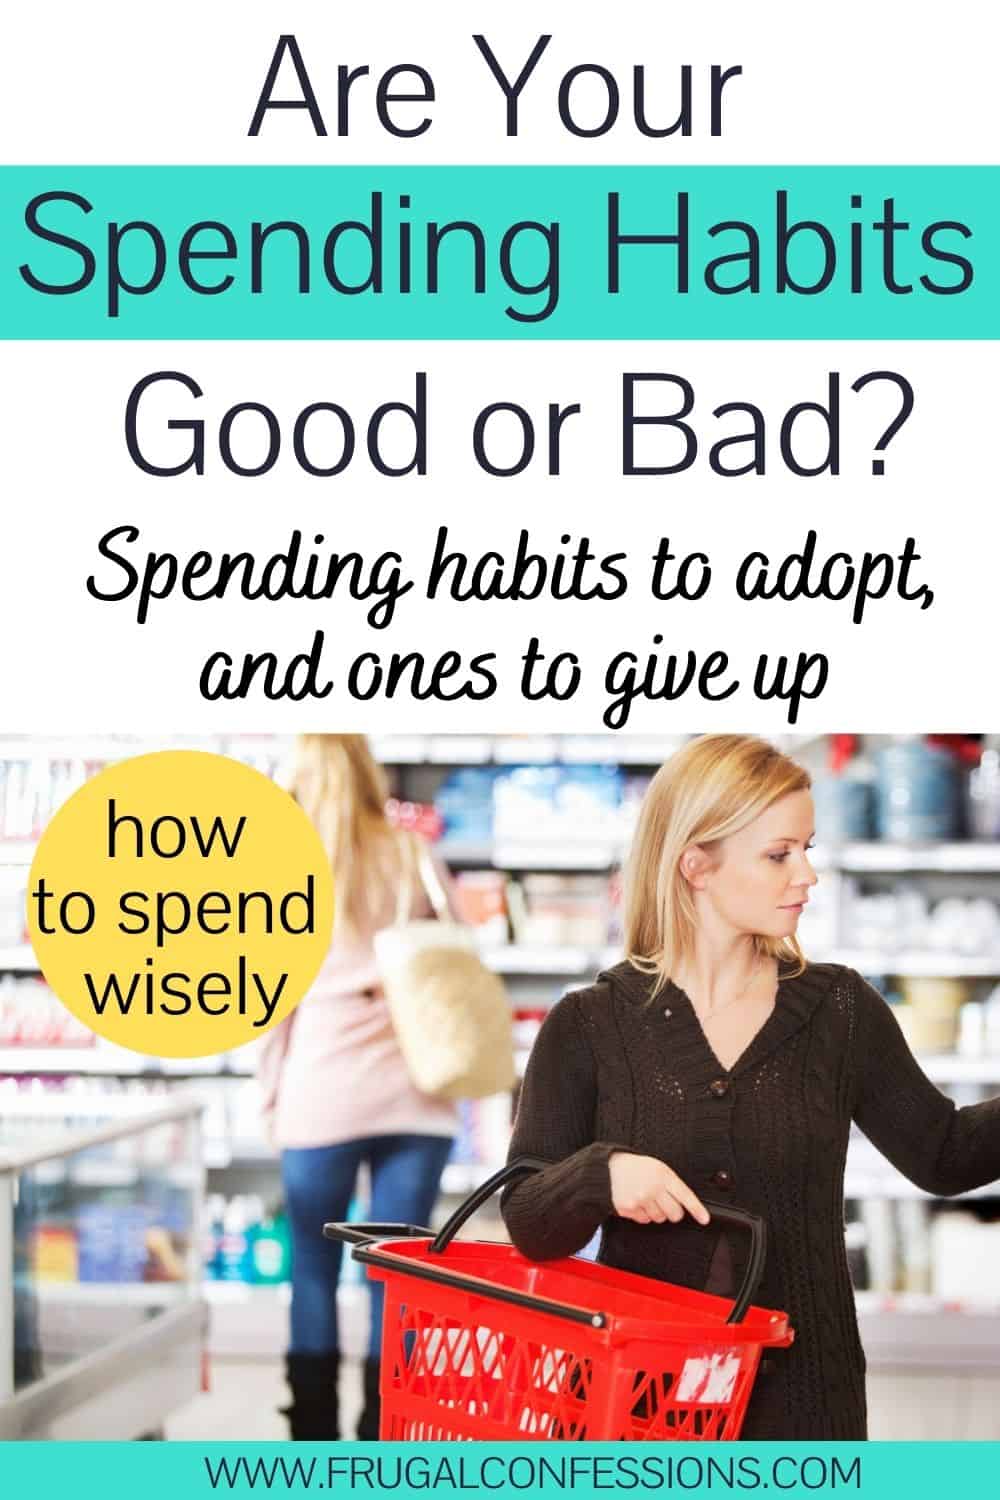 woman with shopping basket making decision at store, text overlay "are your spending habits good or bad? Spending habits to adopt and ones to give up"